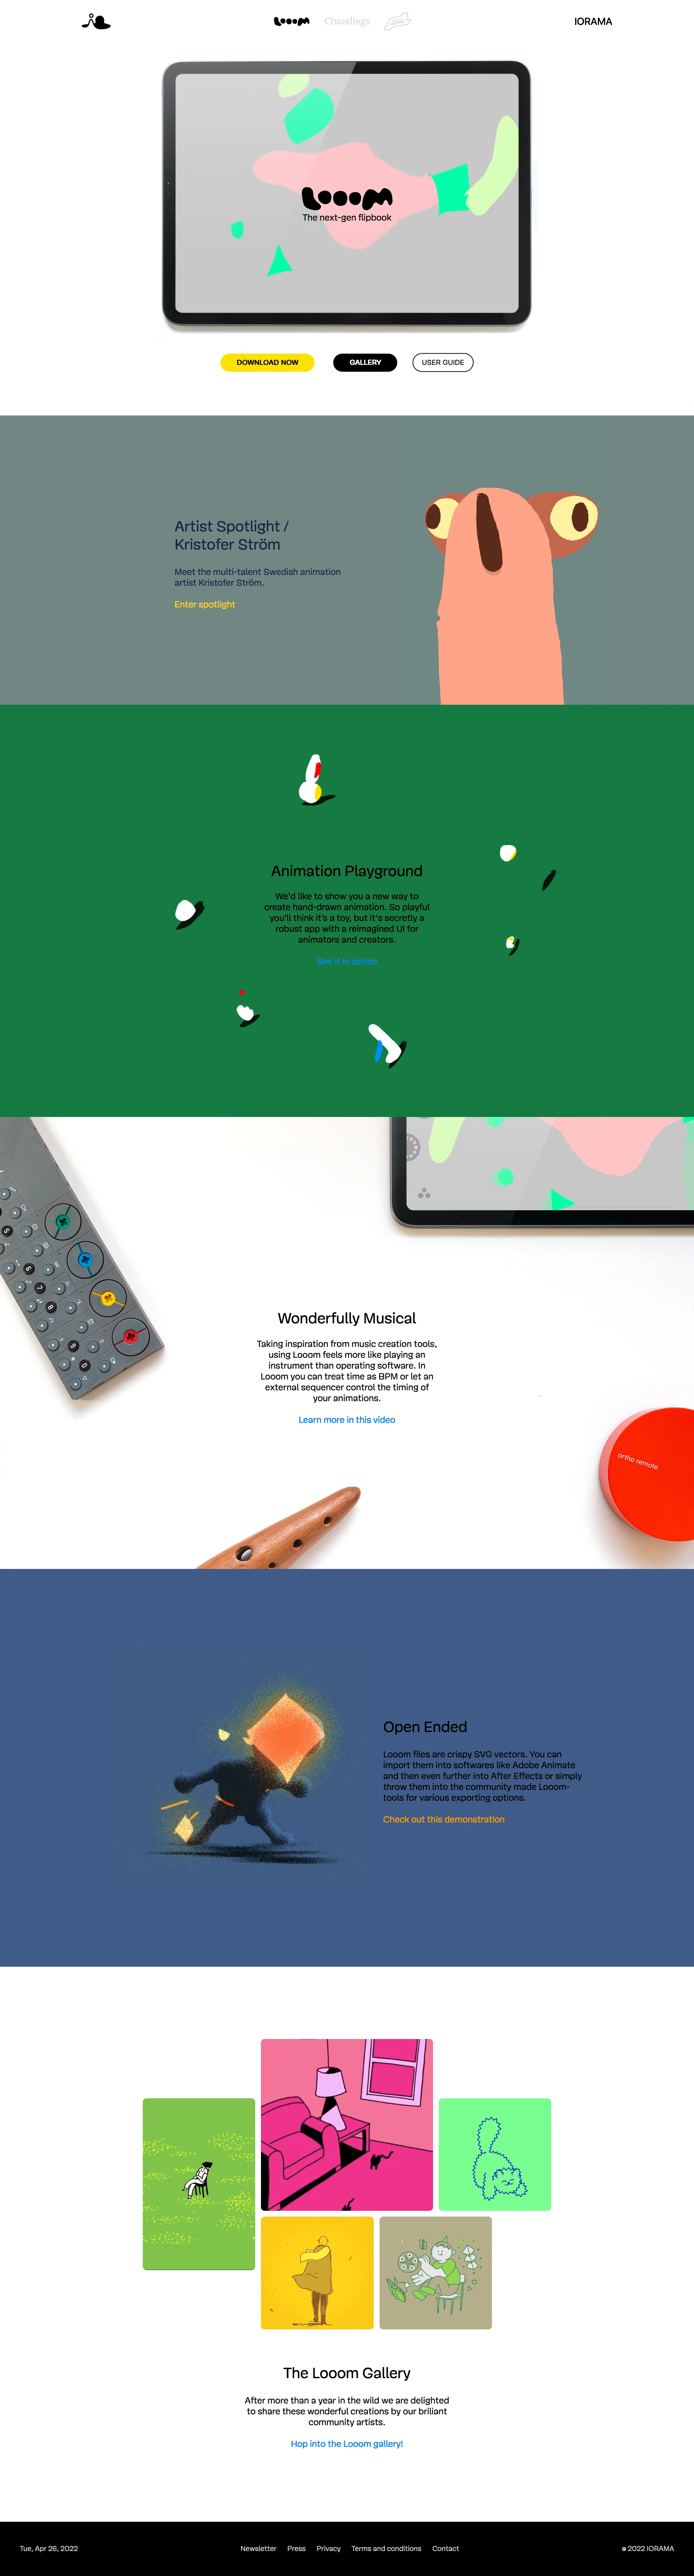 Chantlings by Iorama Landing Page Example: Inspired by musical instruments and early video games we set out to create meaningful and playful experiences for all ages with a hearty focus on creativity.